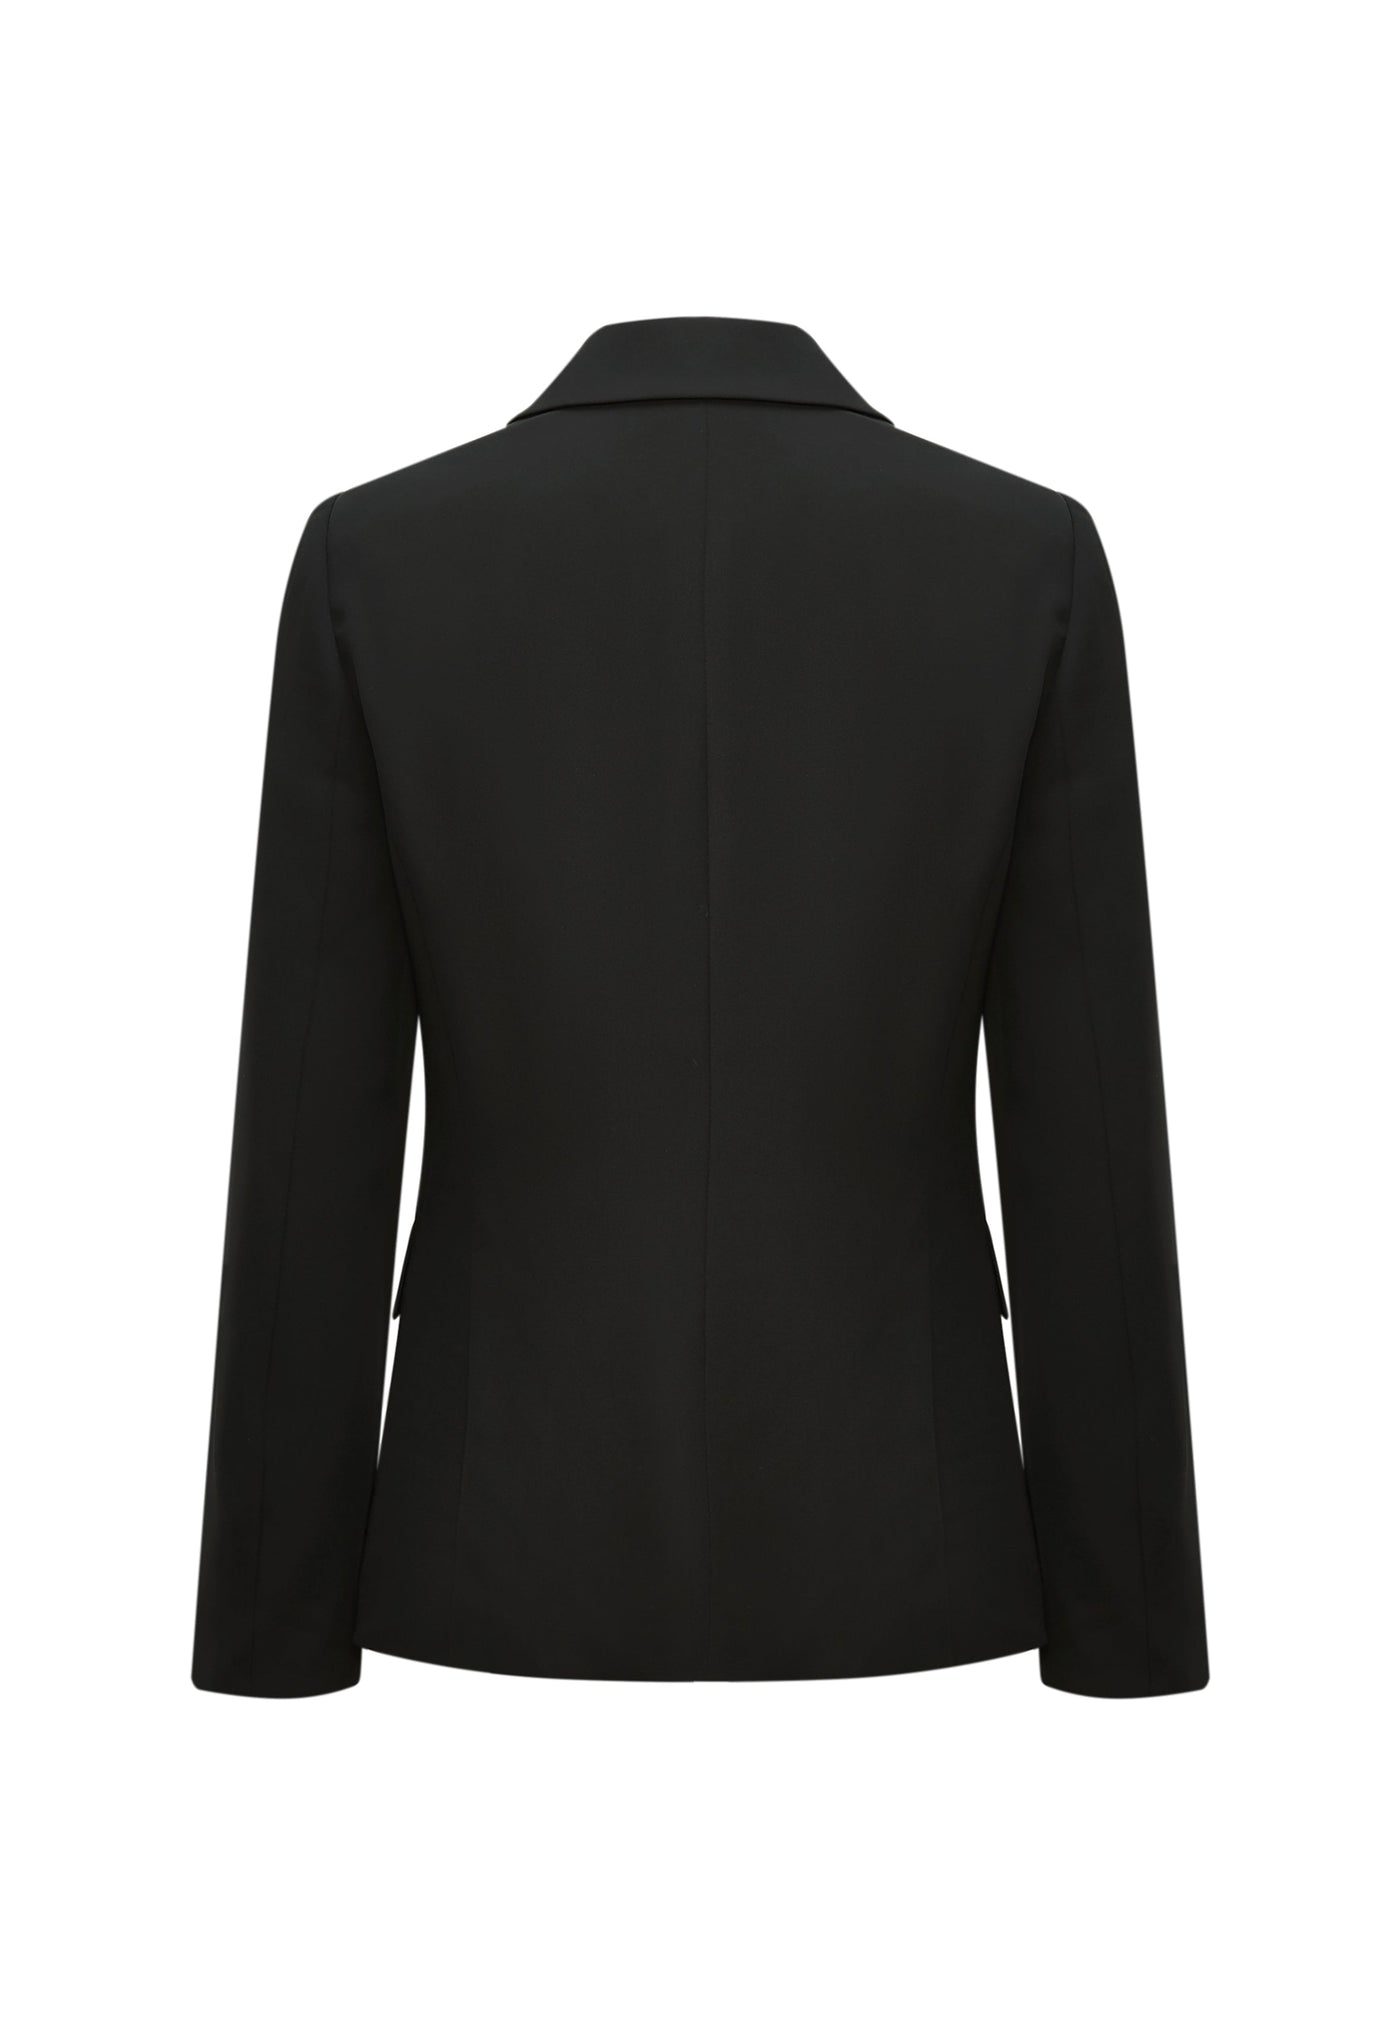 Women Clothing Cool Touch & UV-Protetction Suit Blazer Slim Fit